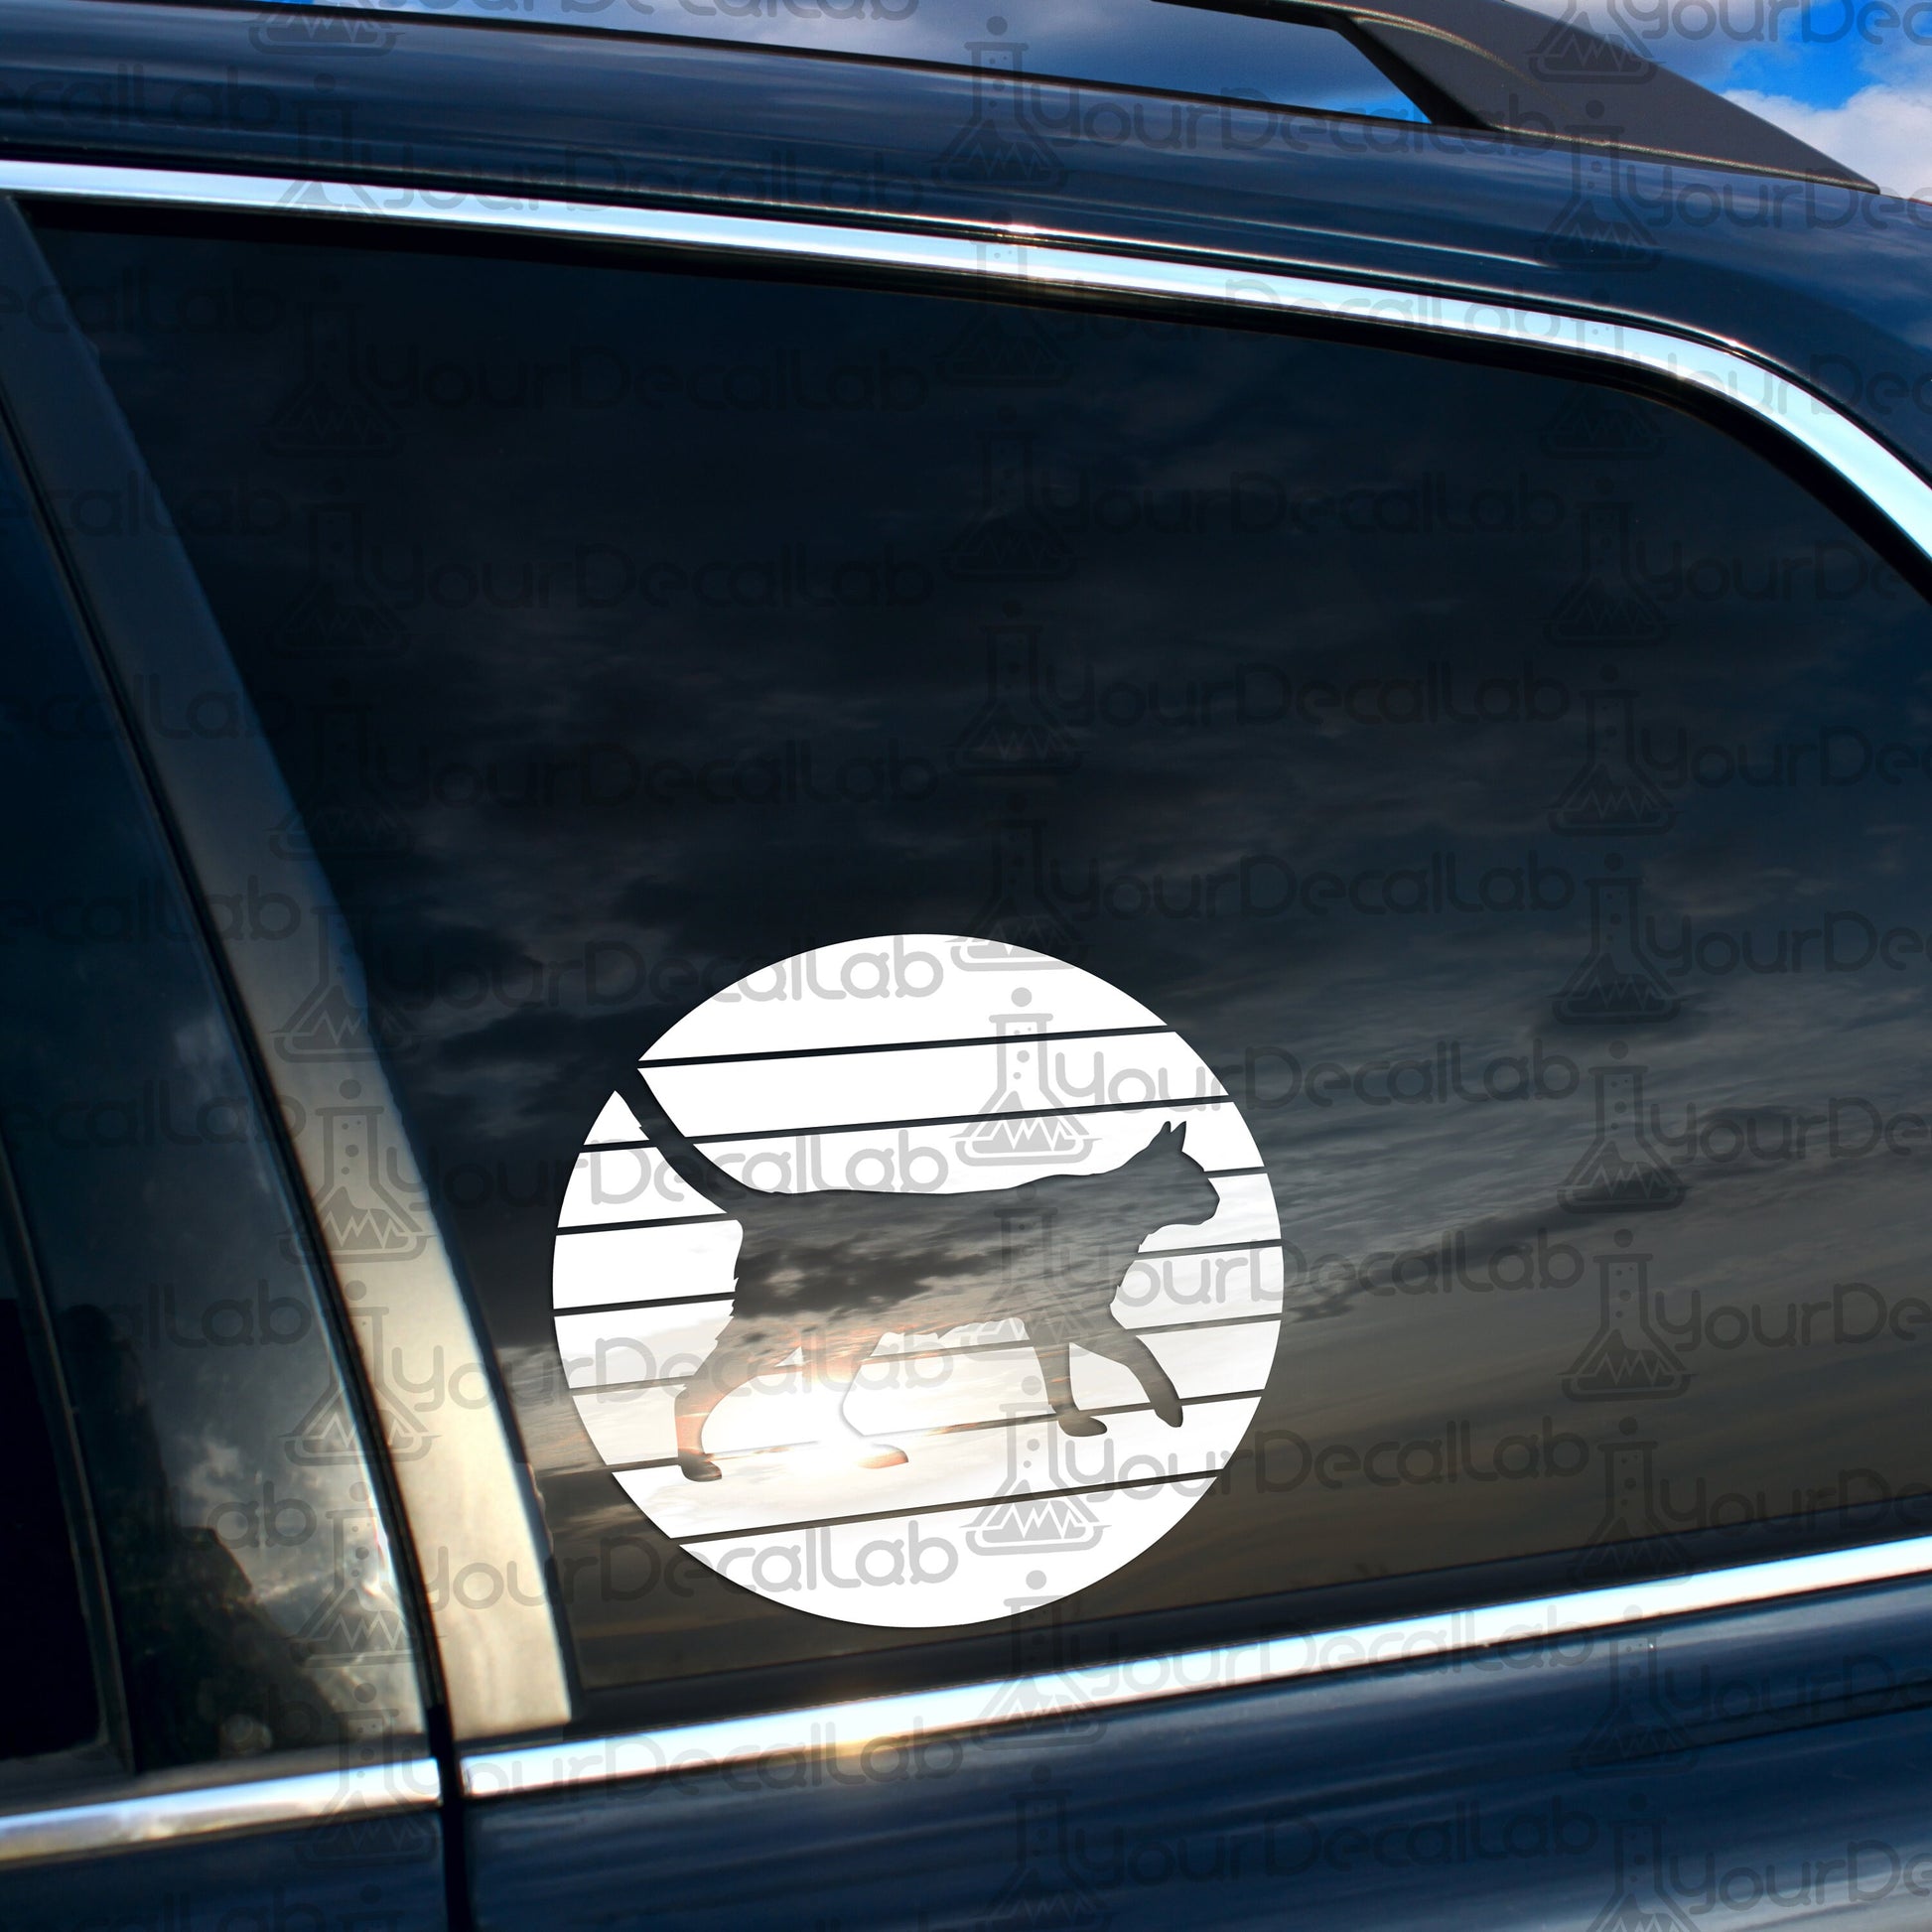 a cat sticker on the side of a car